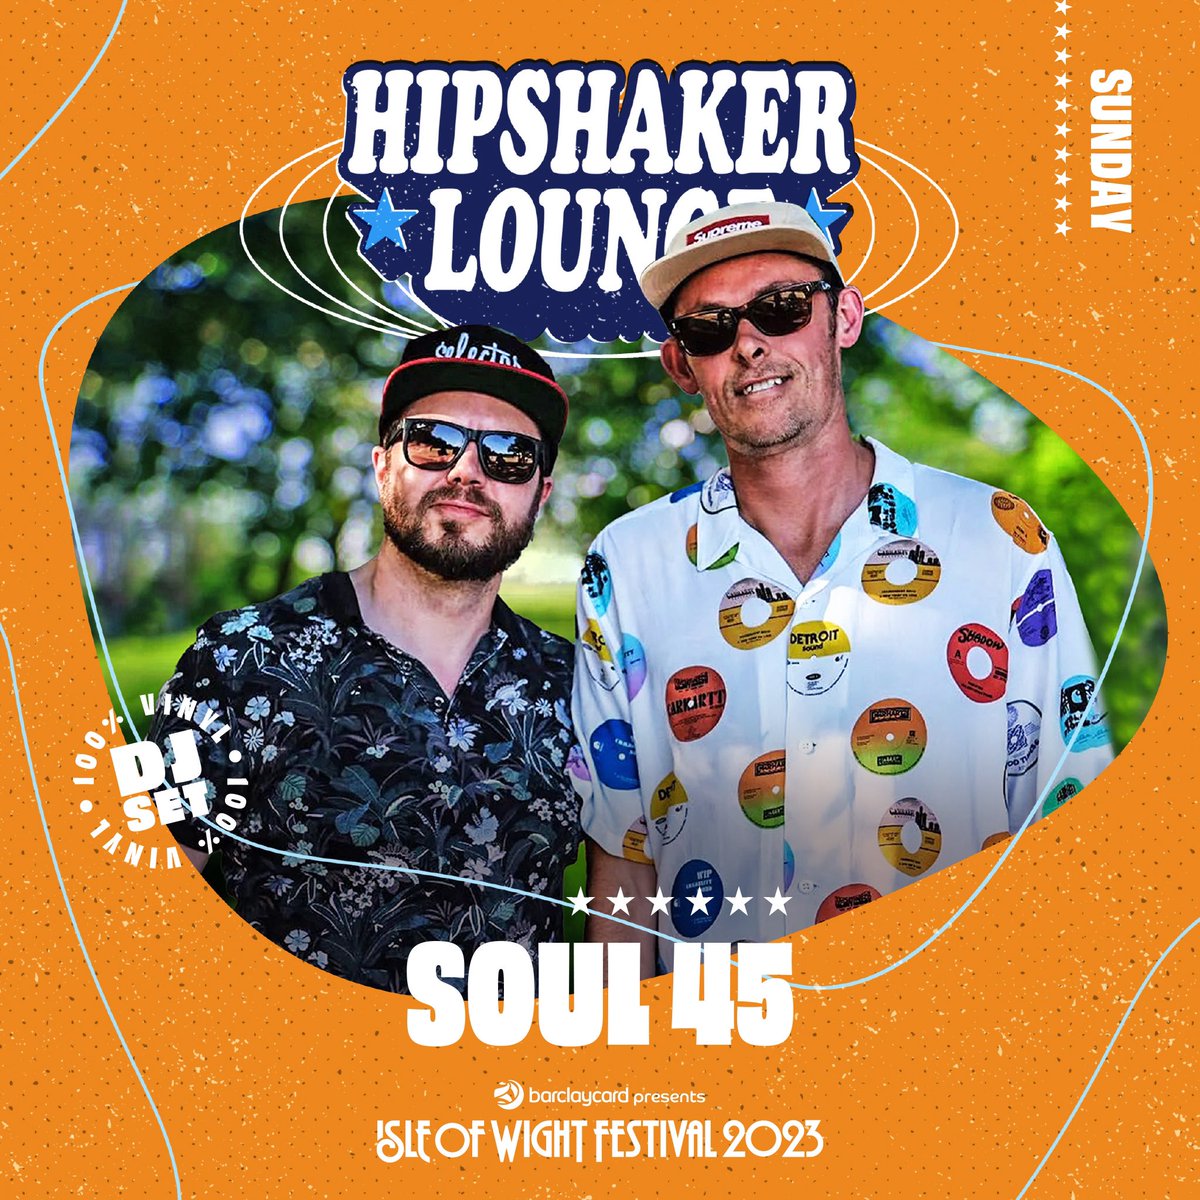 More great DJs at Barclaycard presents the @IsleOfWightFest 2023 … on Saturday night we’ve got legendary Indie duo @CHAOSclub DJs with their trademark ‘Indie & Britpop Classics’ … Sunday it’s @soul45djs and their renowned ‘Maximum Funk & Soul’ set!!

#BarclaycardxIOW
#IOW2023